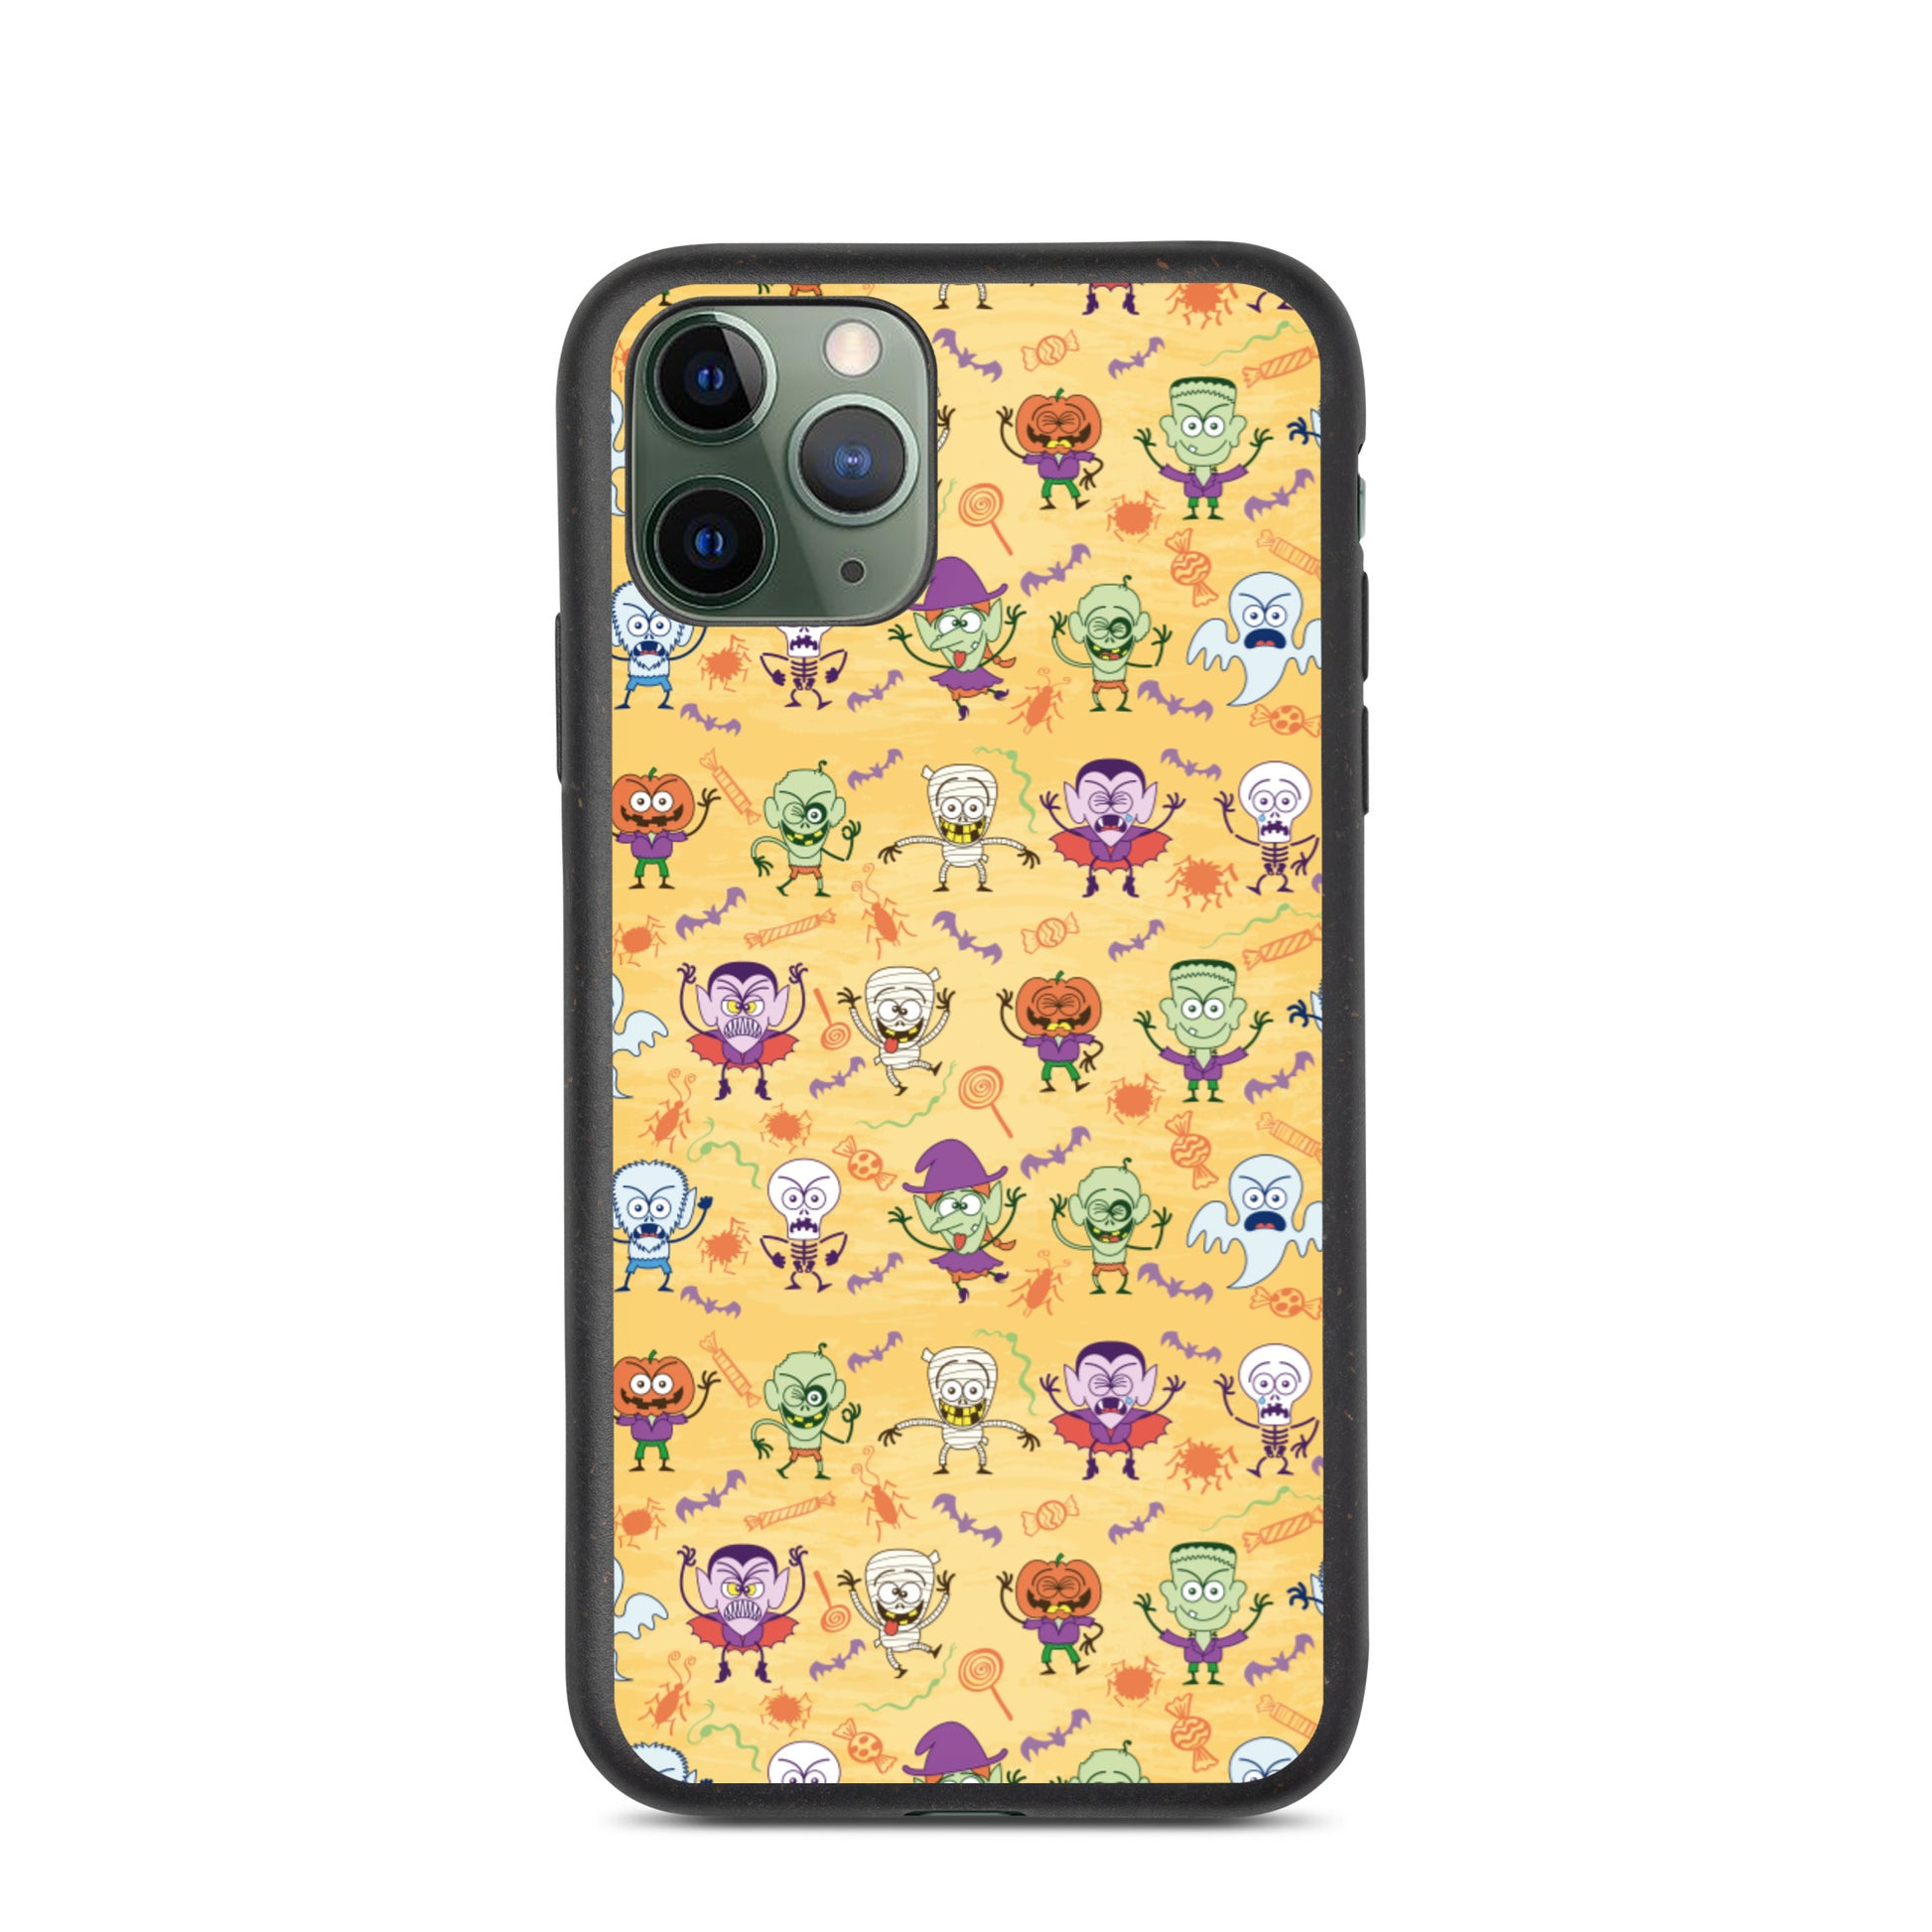 Halloween characters making funny faces Speckled iPhone case. IPhone 11 pro